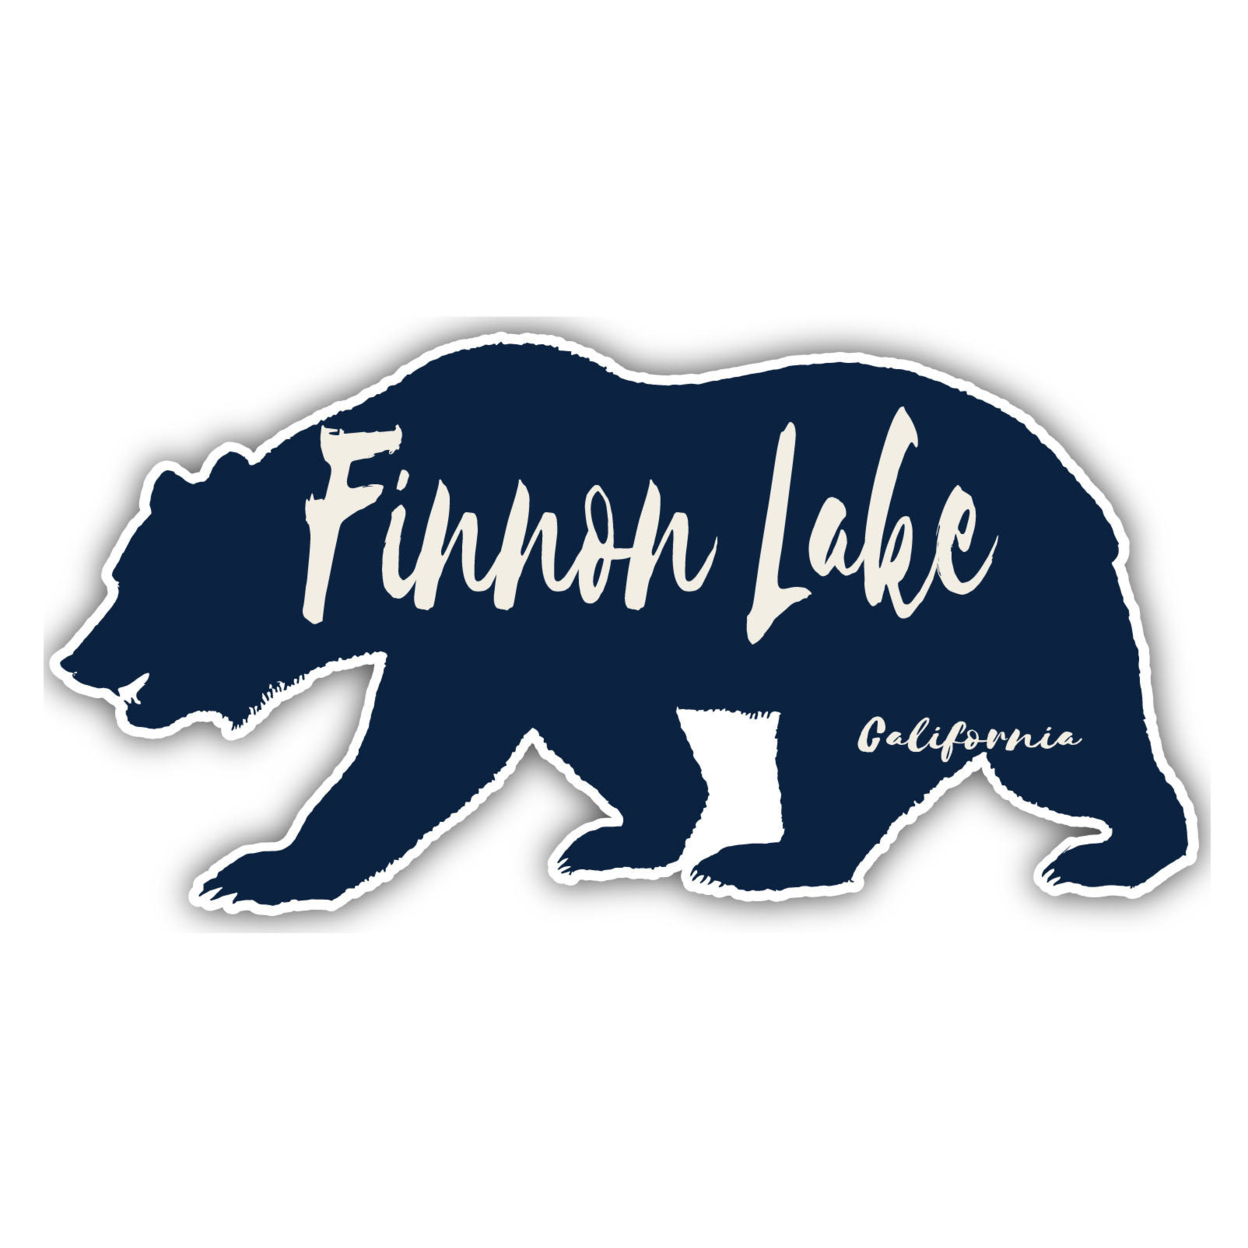 Finnon Lake California Souvenir Decorative Stickers (Choose Theme And Size) - 4-Pack, 2-Inch, Camp Life